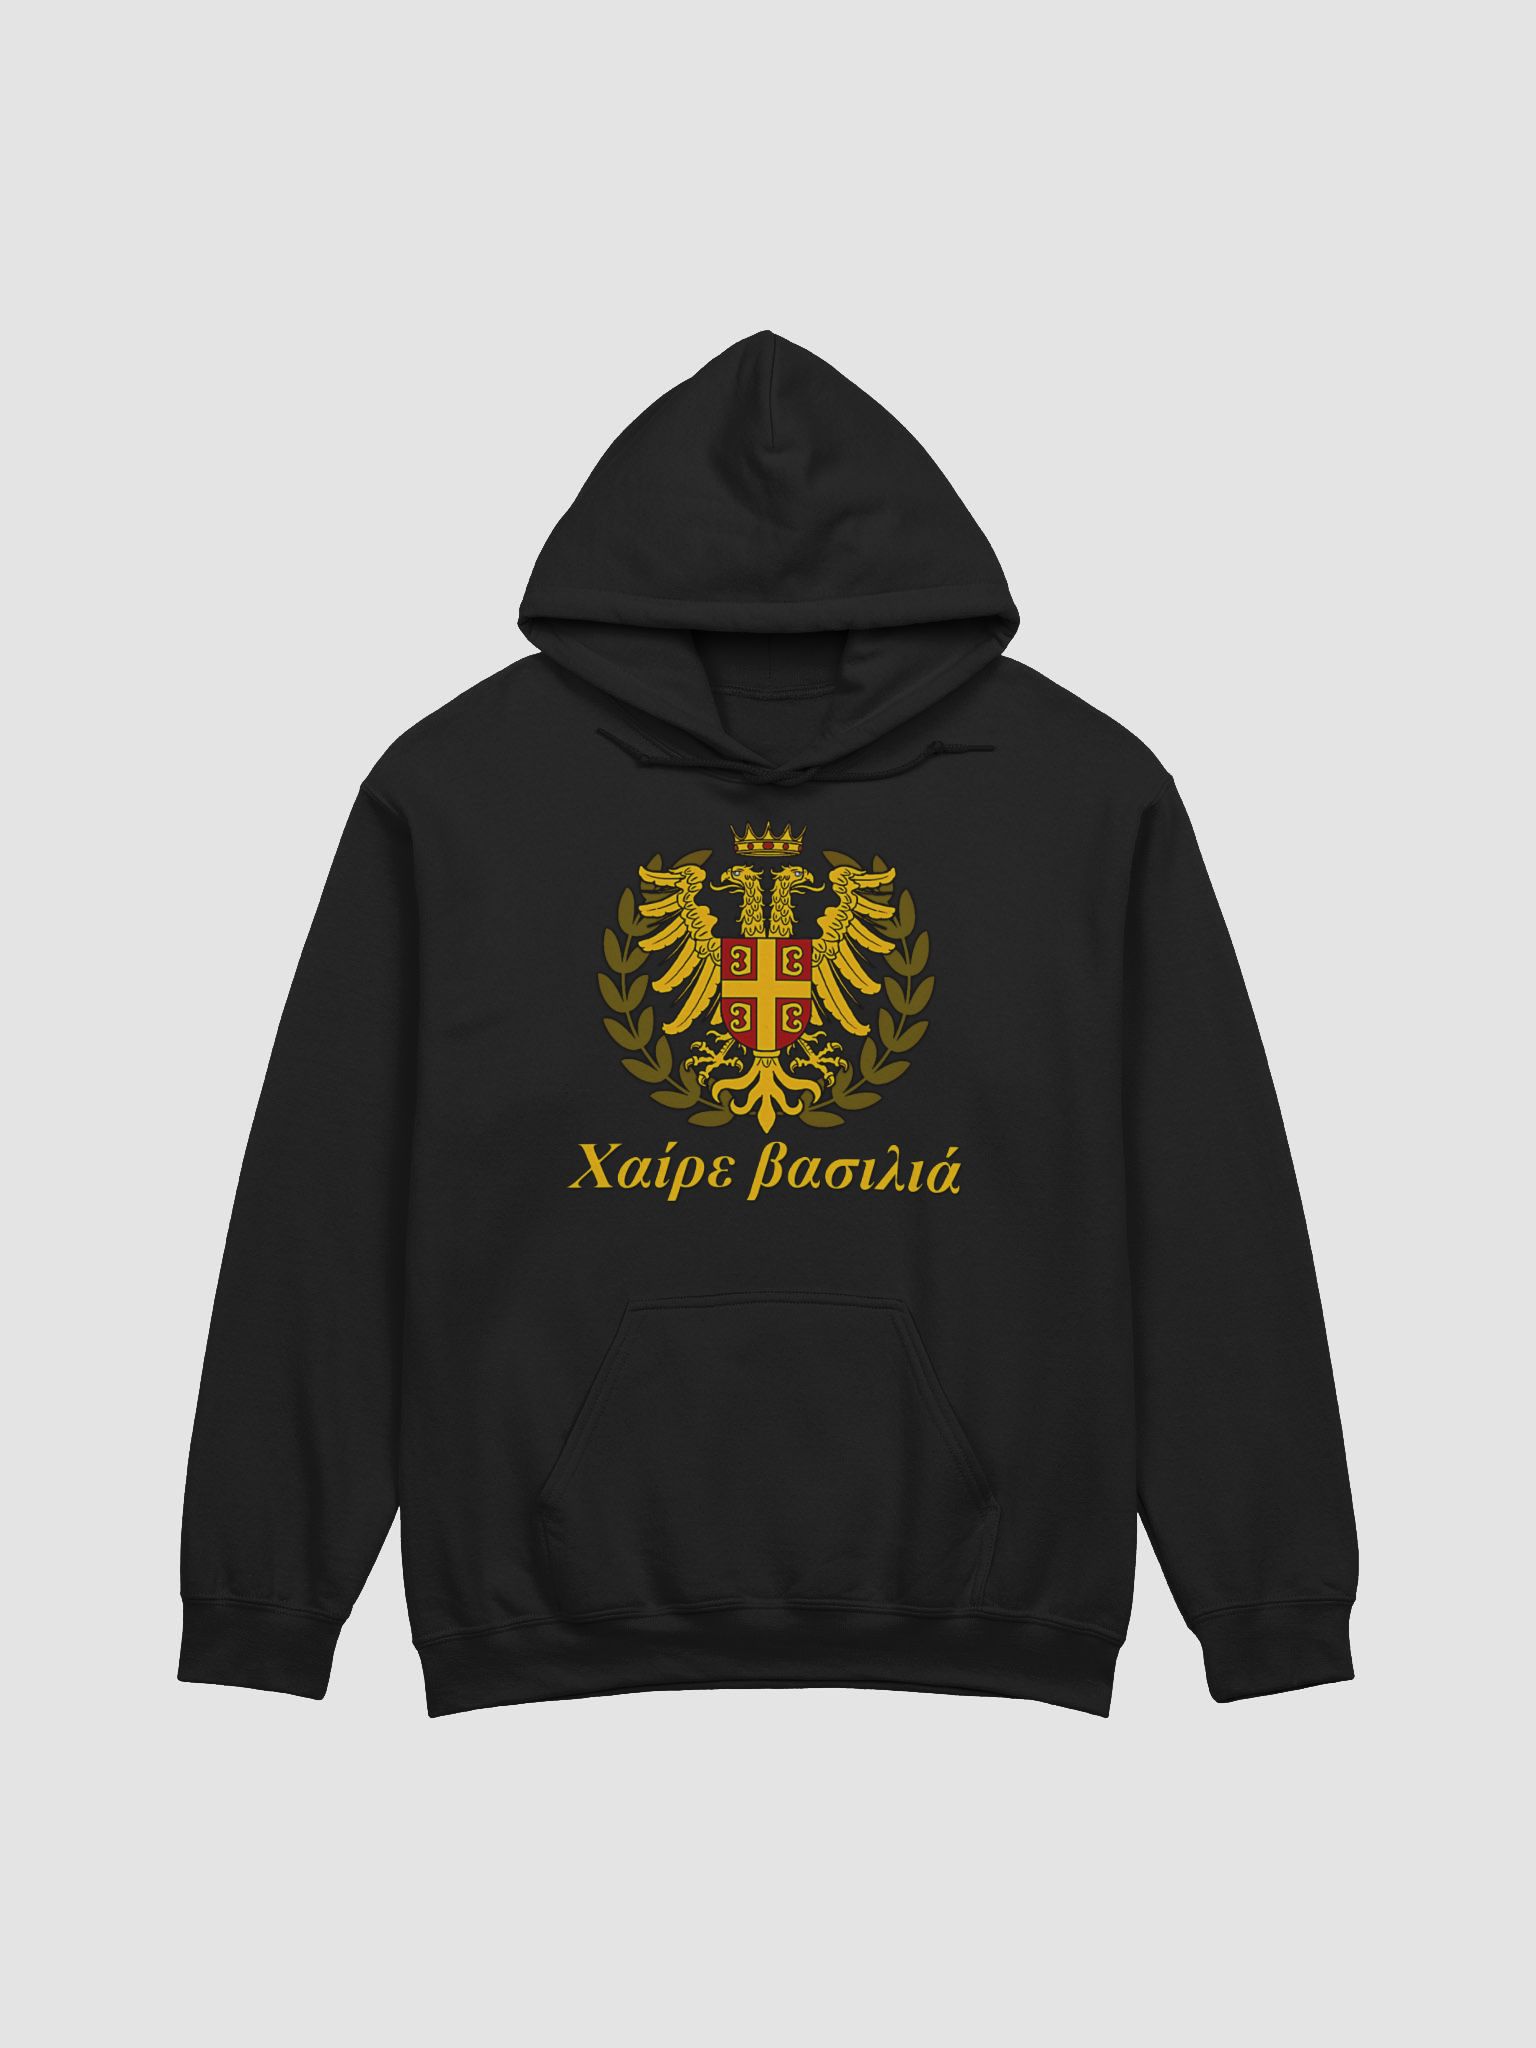 Byzantine Empire Pullover Hoodie for Sale by WarlordApparel